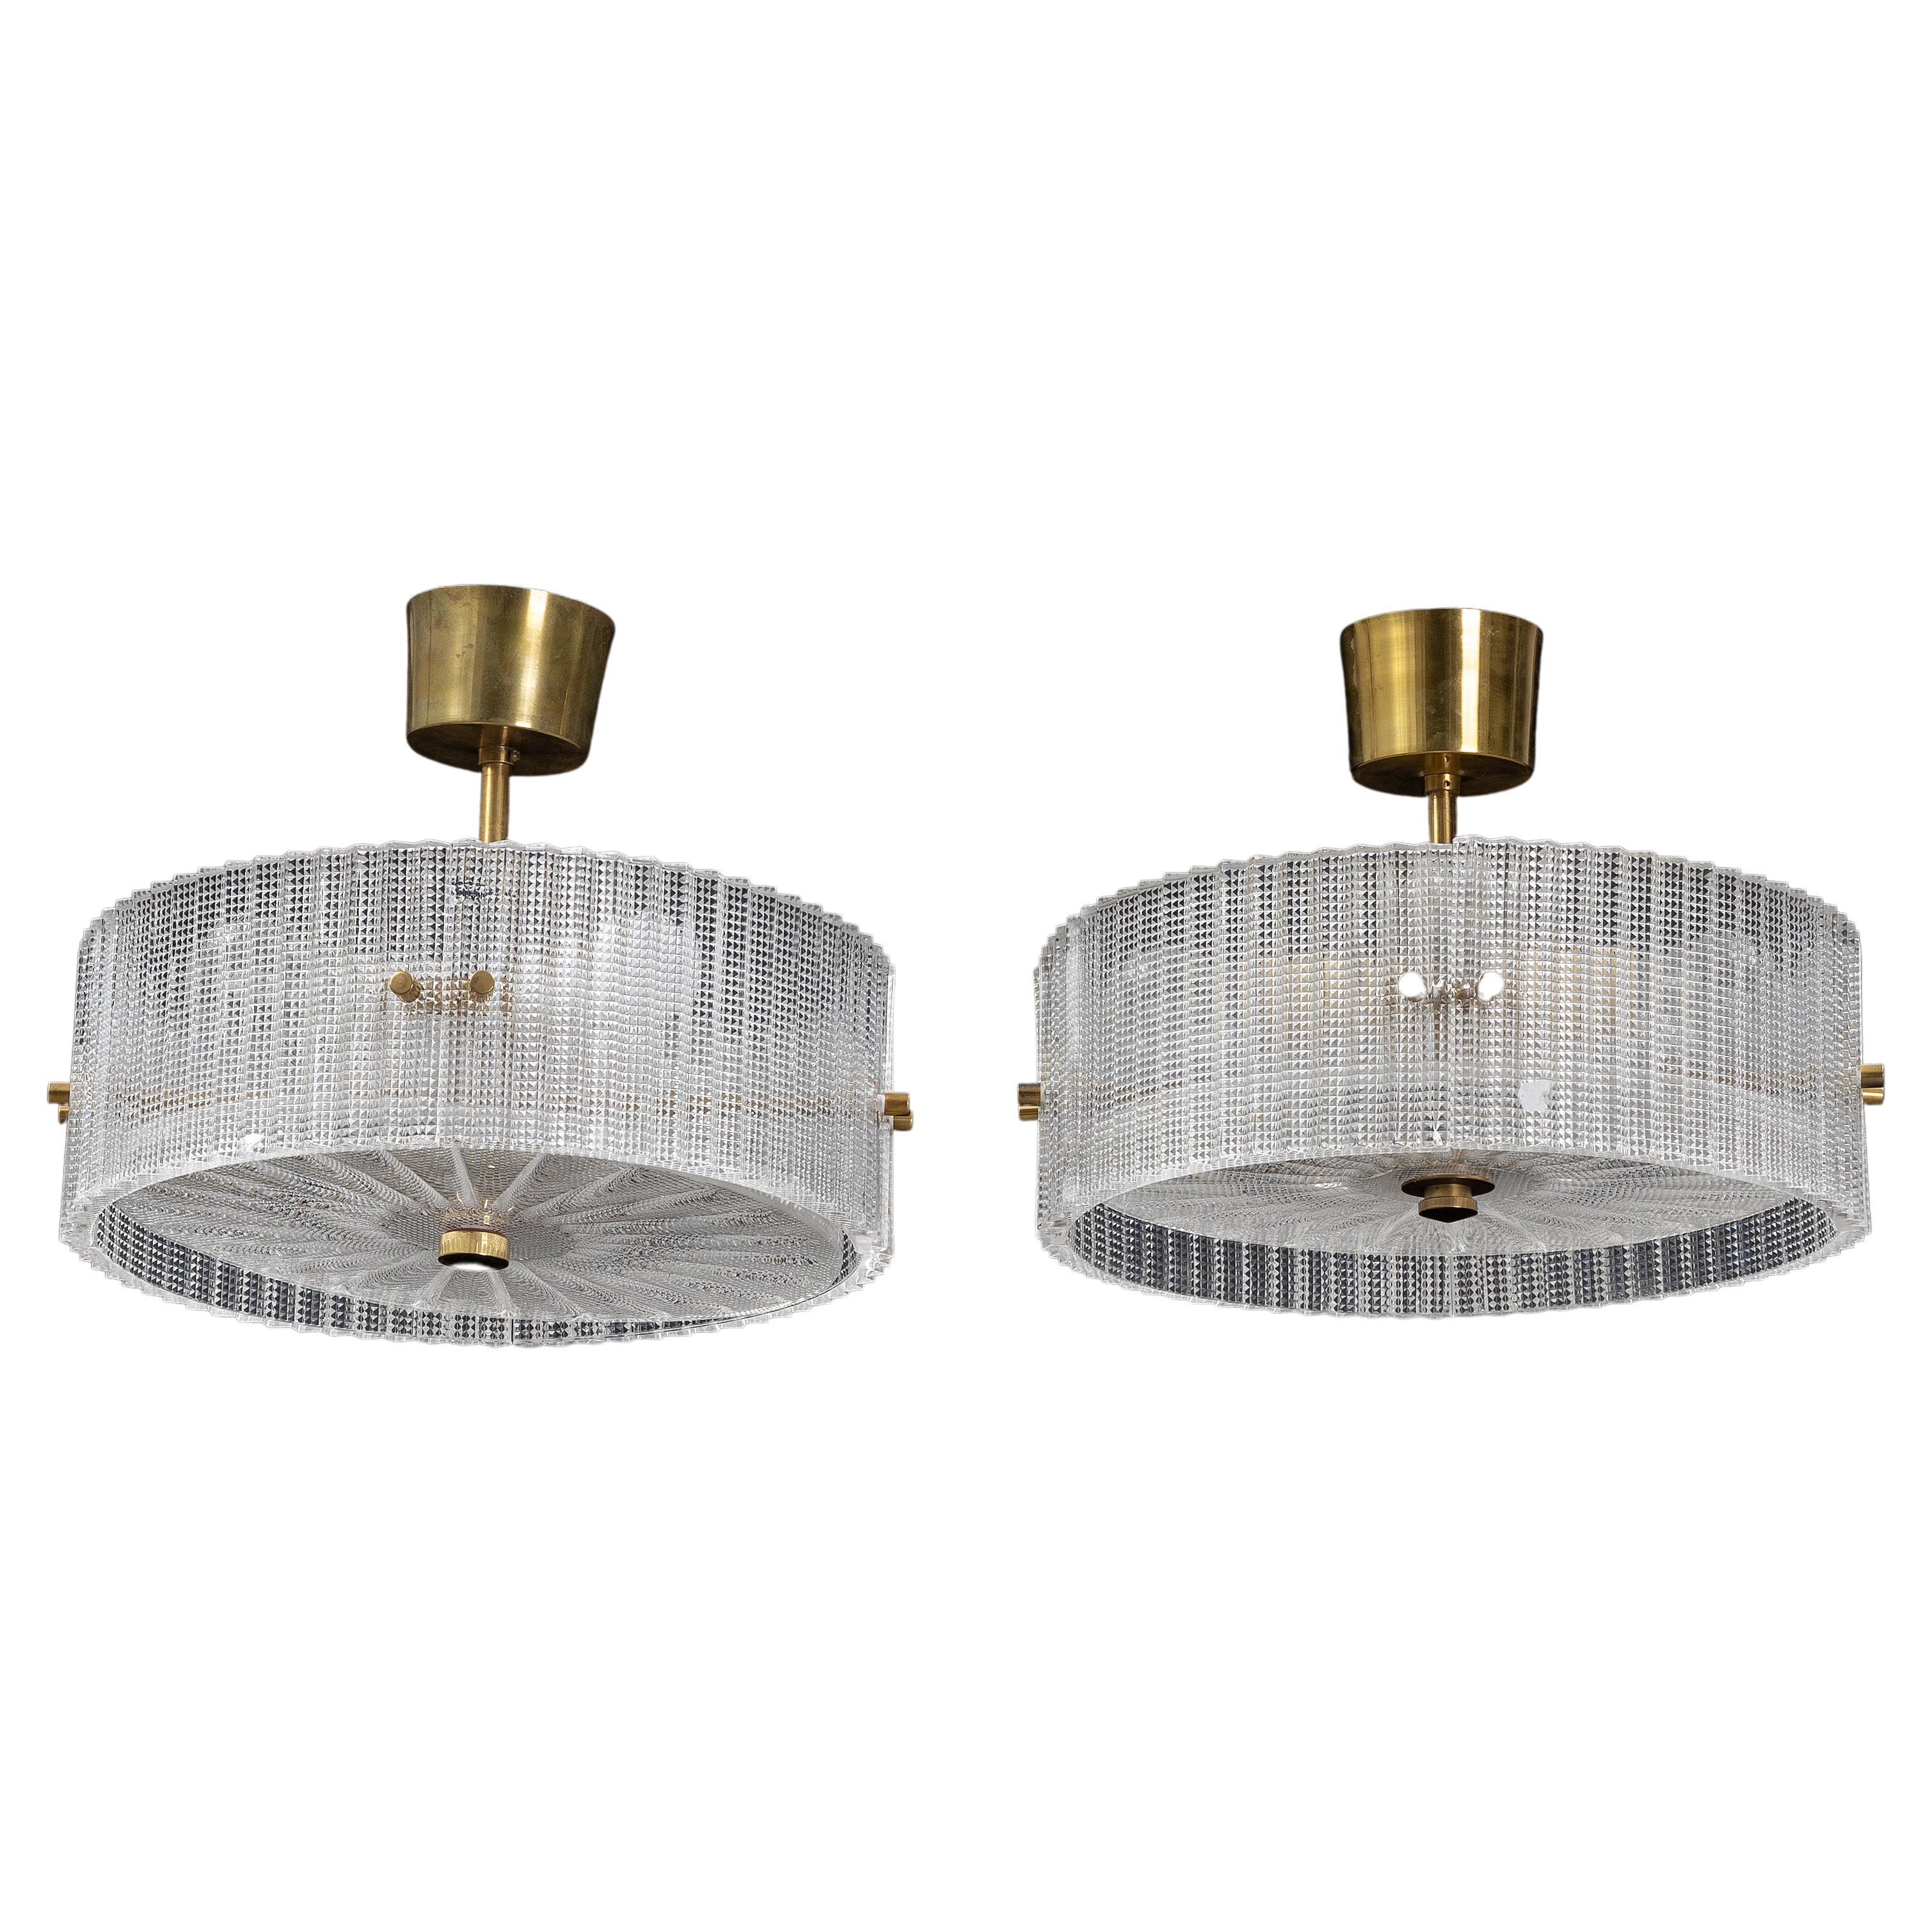 Carl Fagerlund Ceiling Light for Orrefors Glass and Brass, Sweden, 1960 For Sale